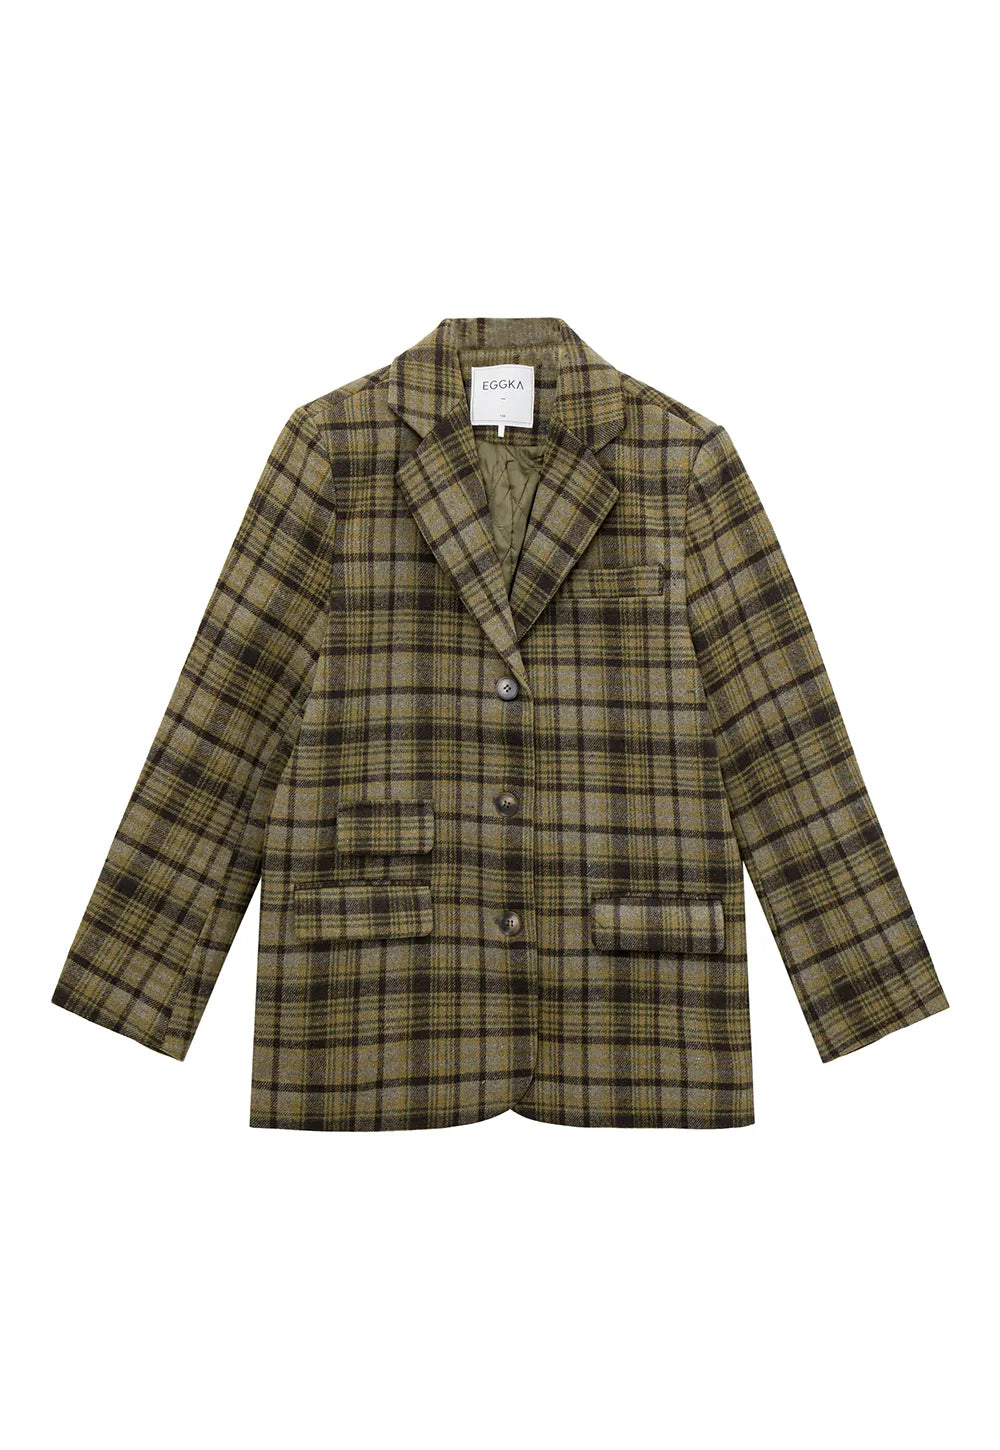 Timeless Plaid Single-Breasted Blazer with Notched Lapels and Flap Pockets